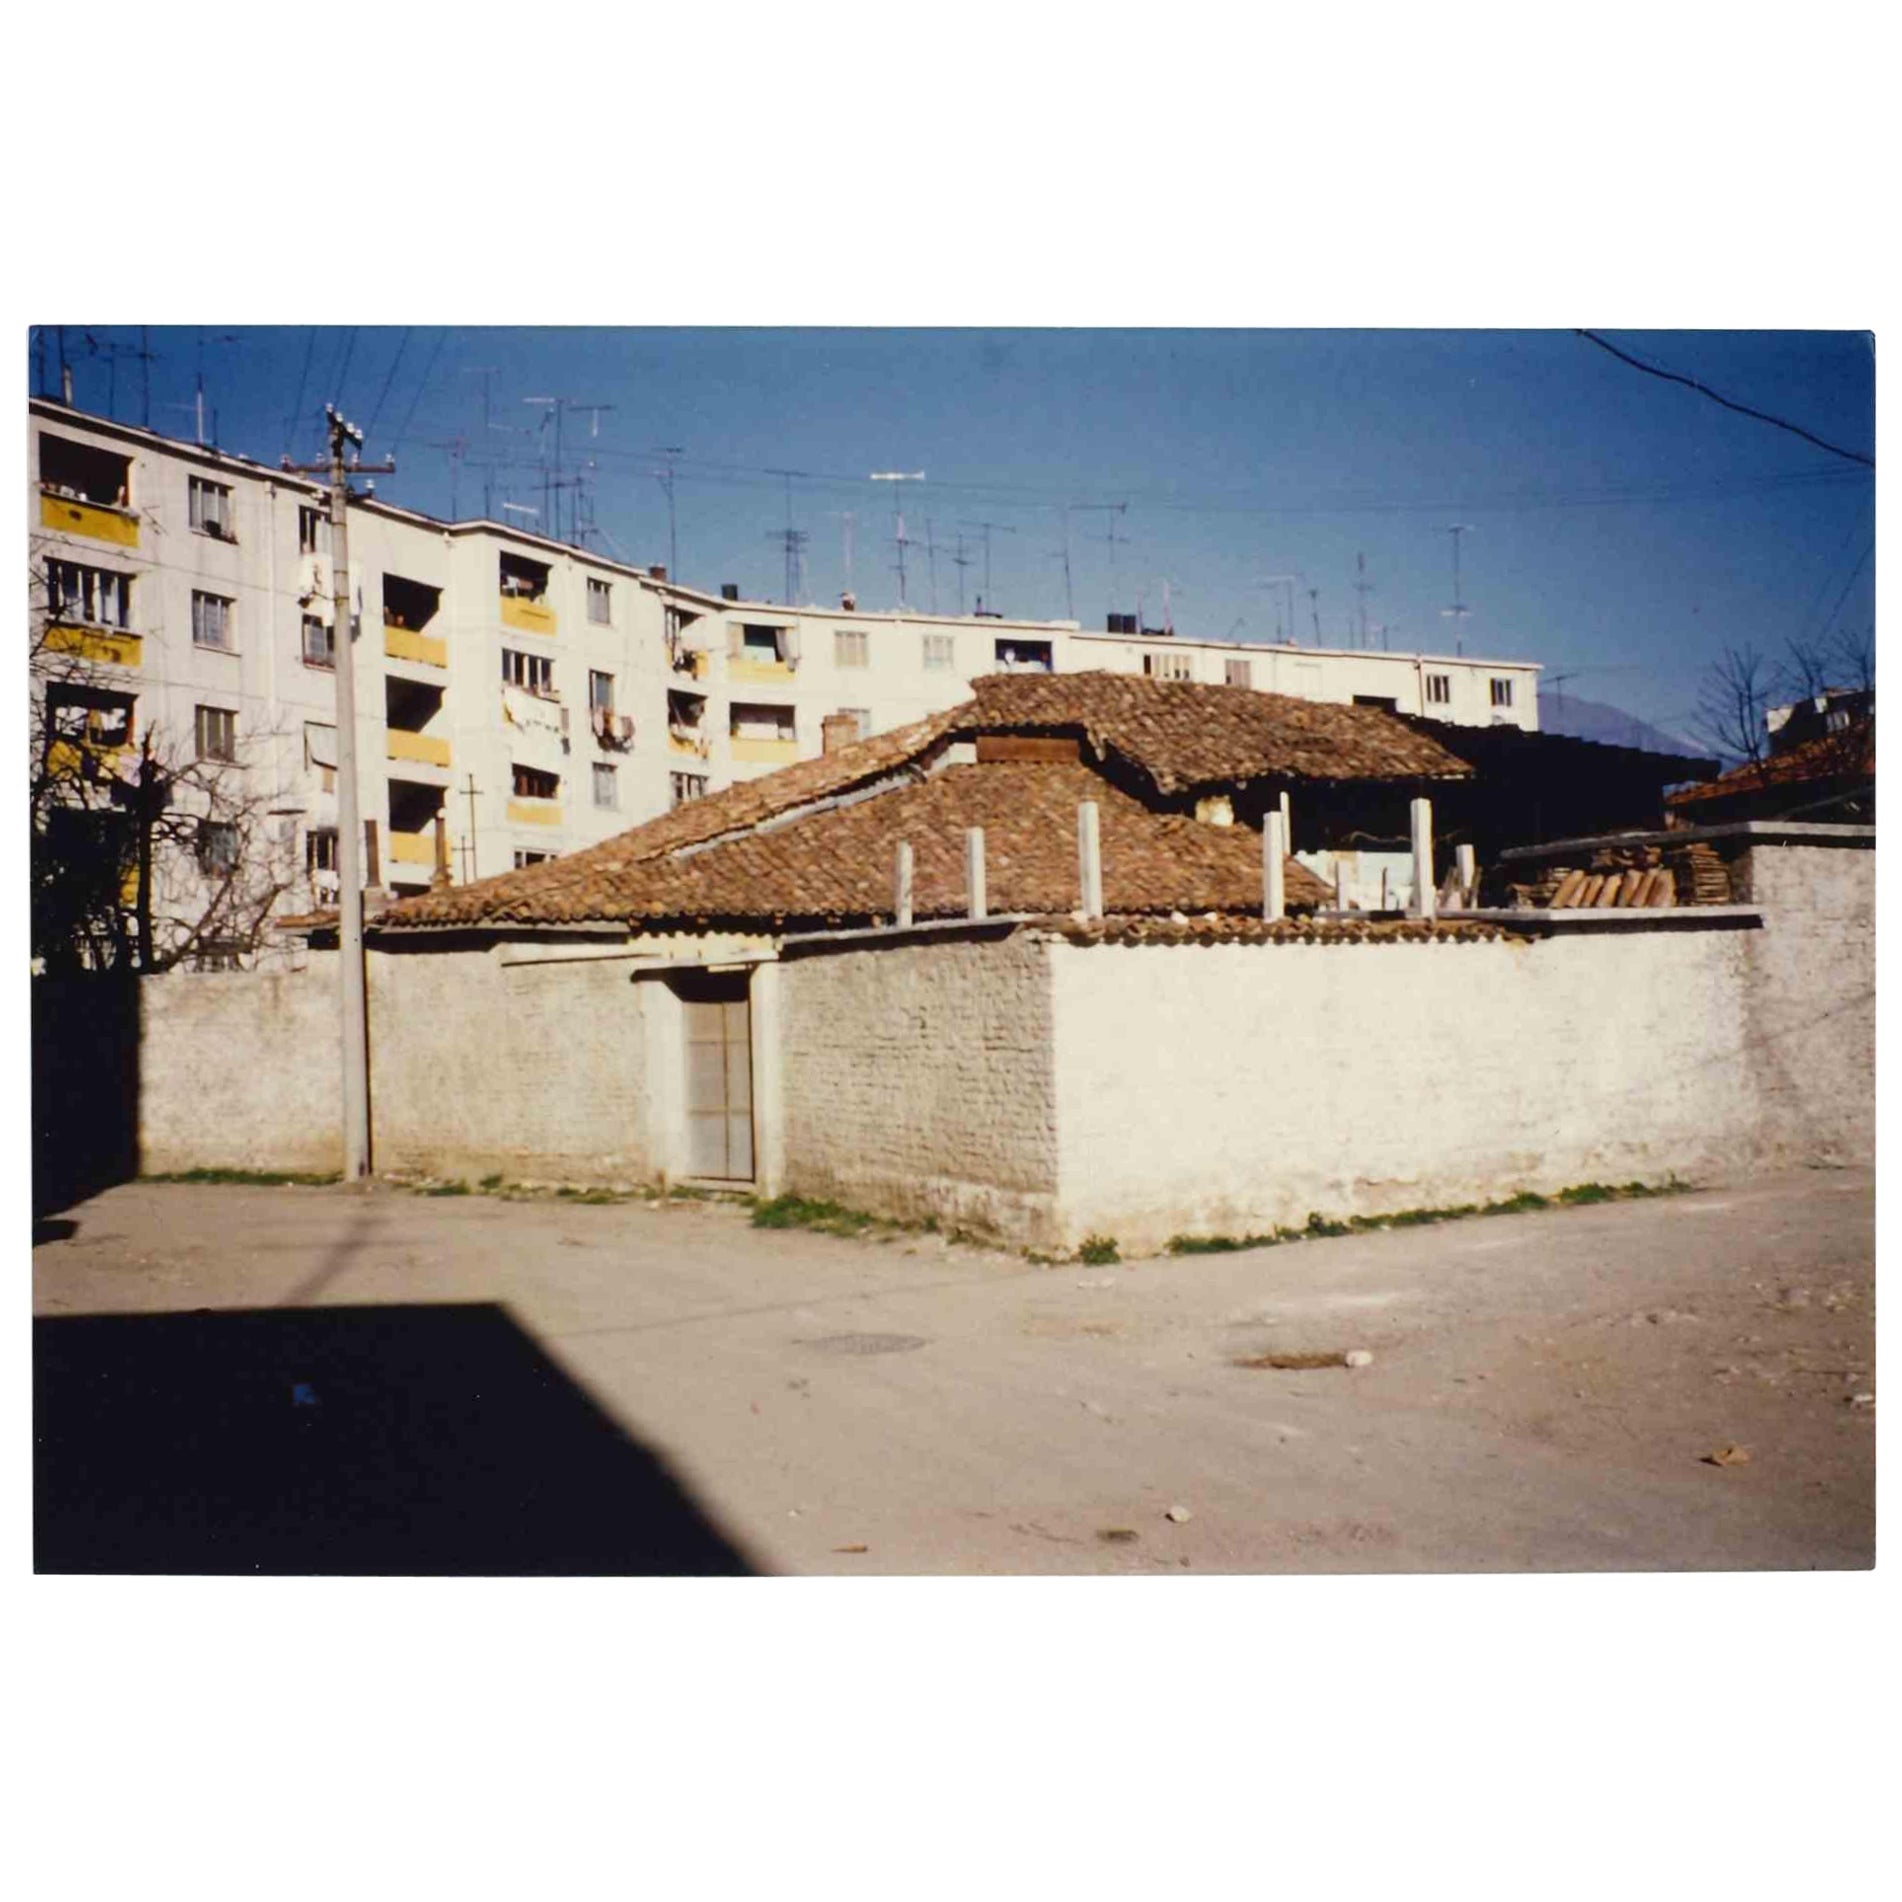 Reportage from Albania - Tirana - Vintage Photograph - Late 1970s